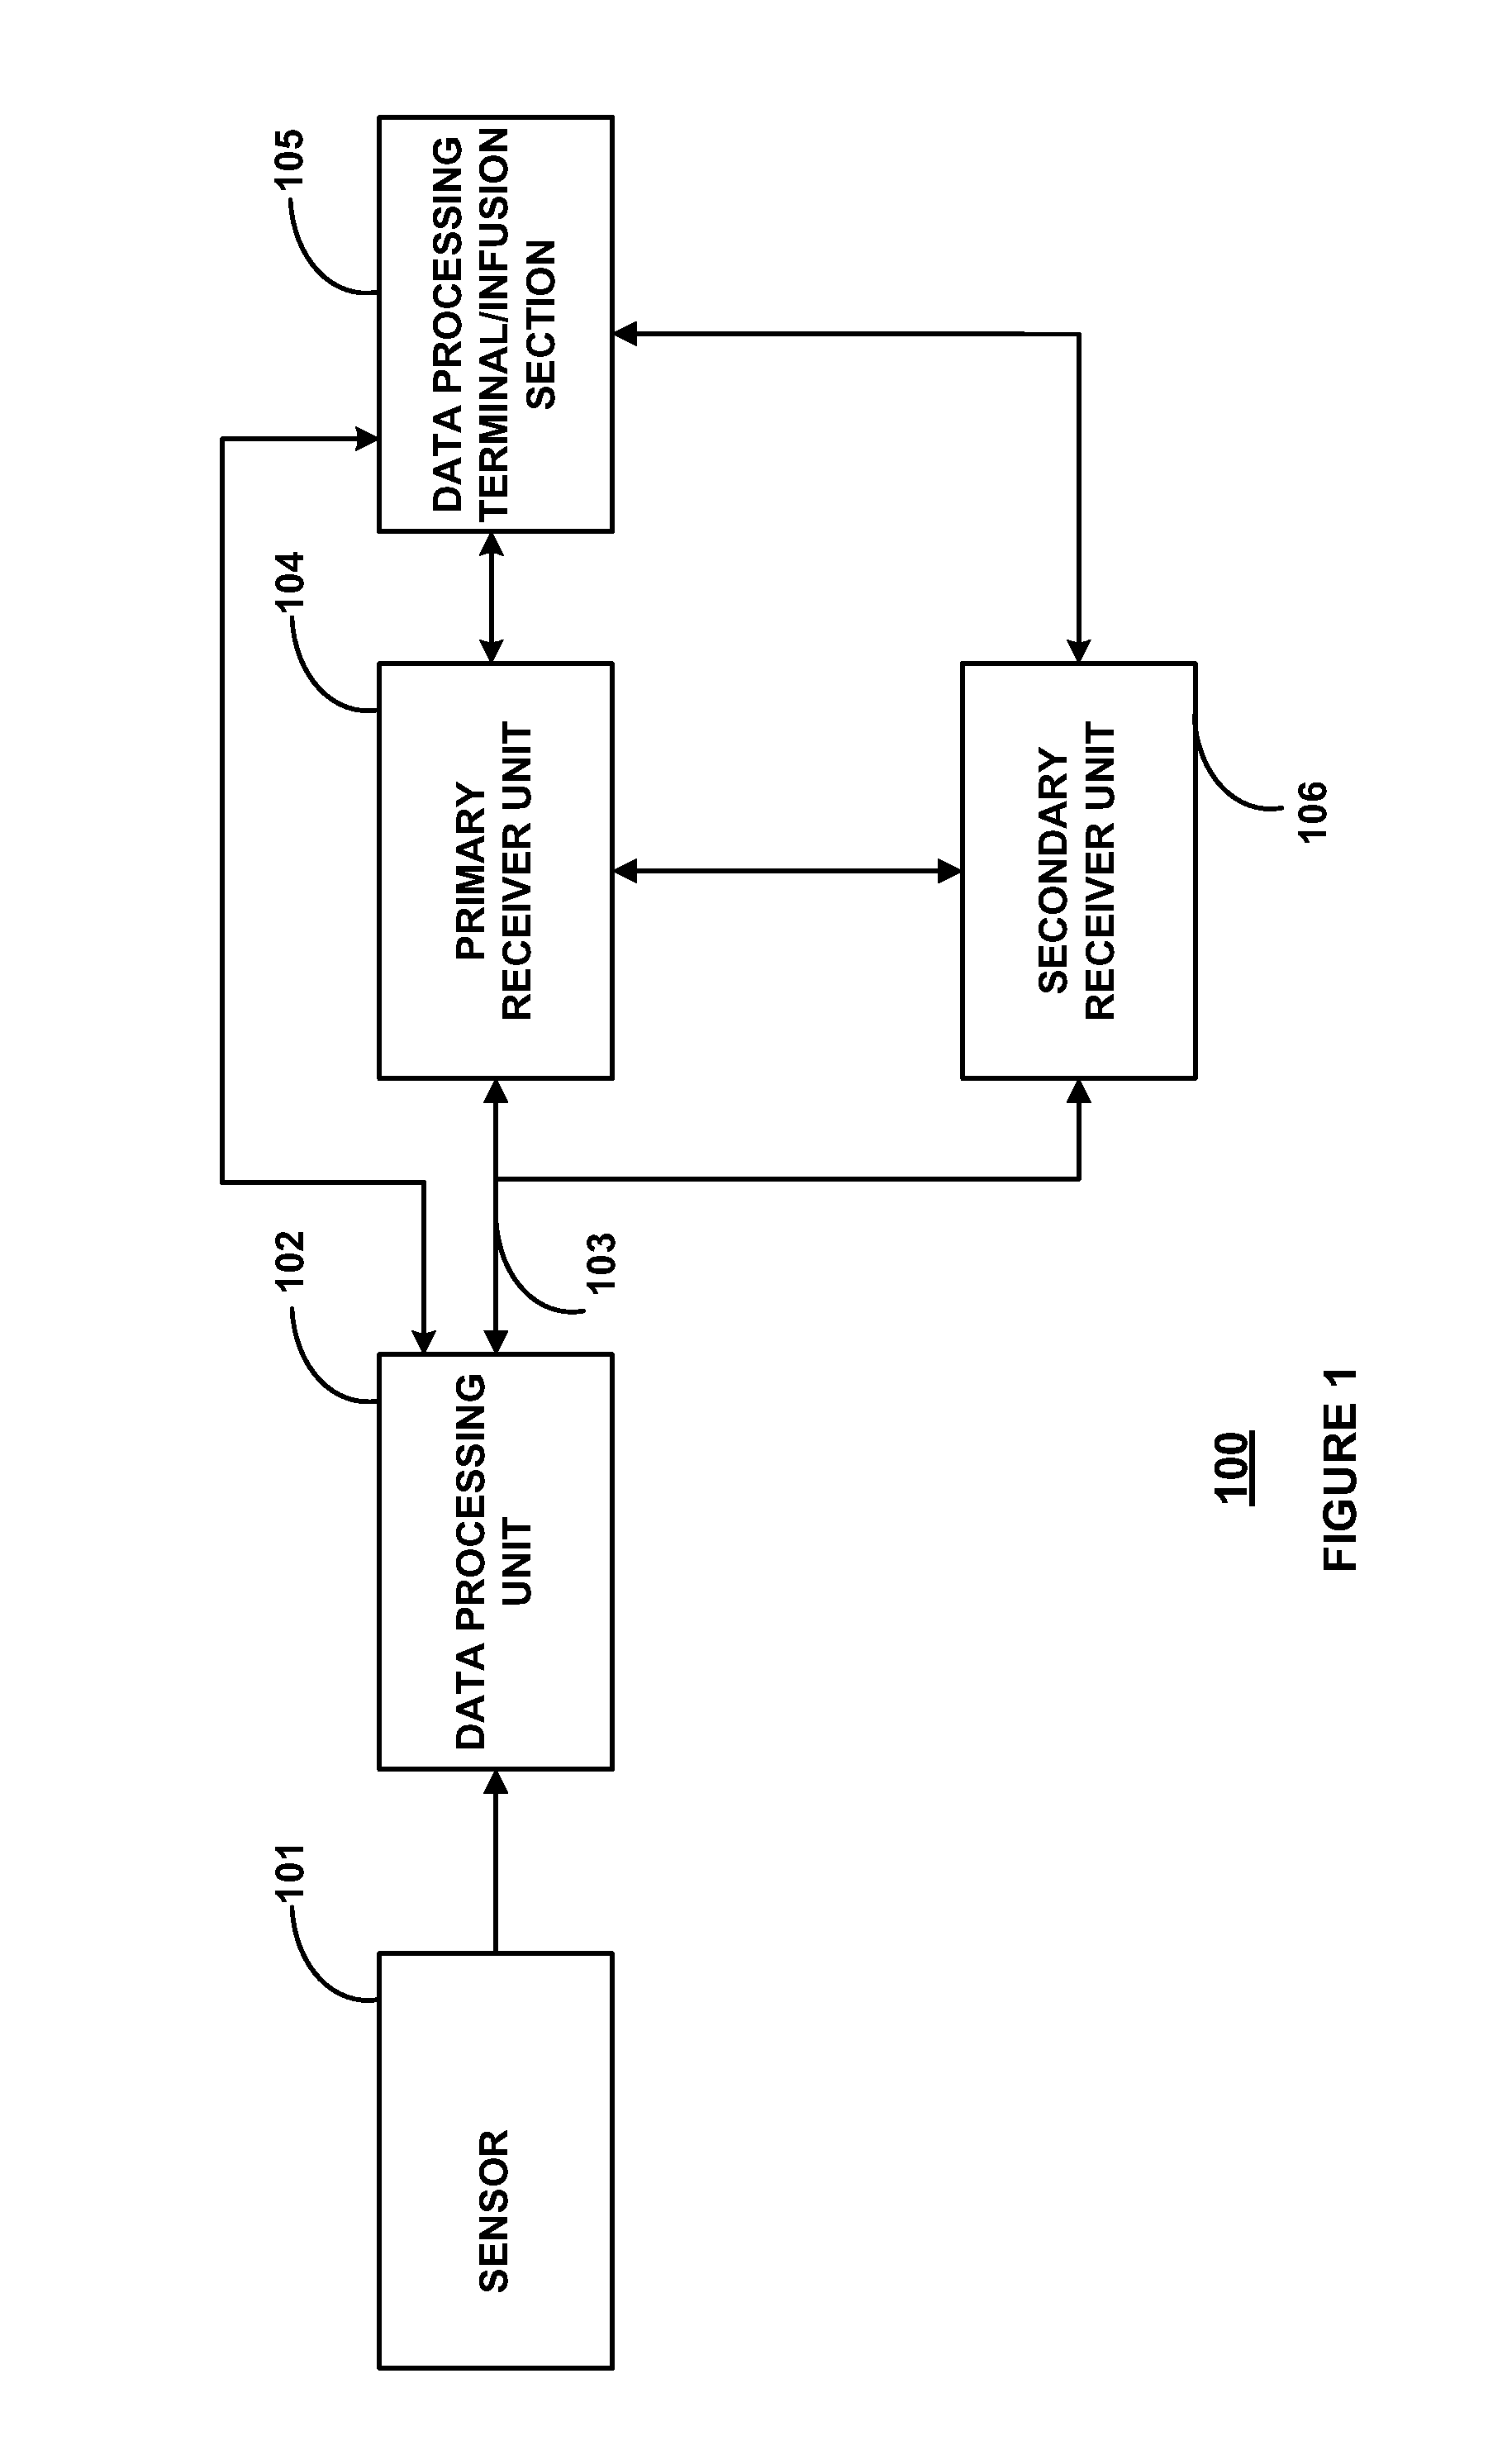 Analyte Signal Processing Device and Methods